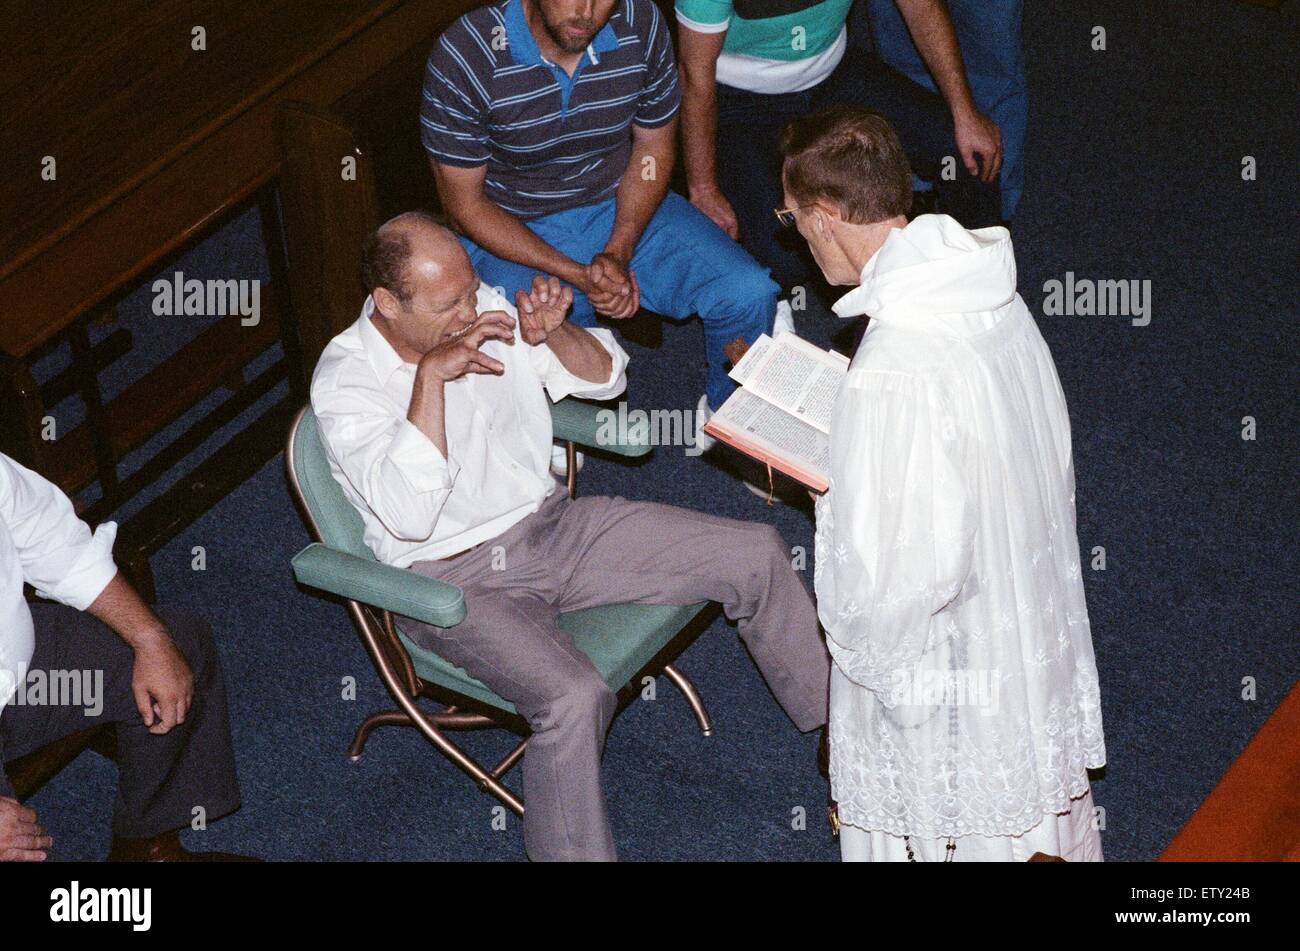 William Ramsey from Southend-on-Sea in the UK being exorcised by Bishop Robert McKenna at 'Our Lady of the Rosary Chapel' in Monroe, Fairfield County, Connecticut, USA. 28th July 1989. Stock Photo